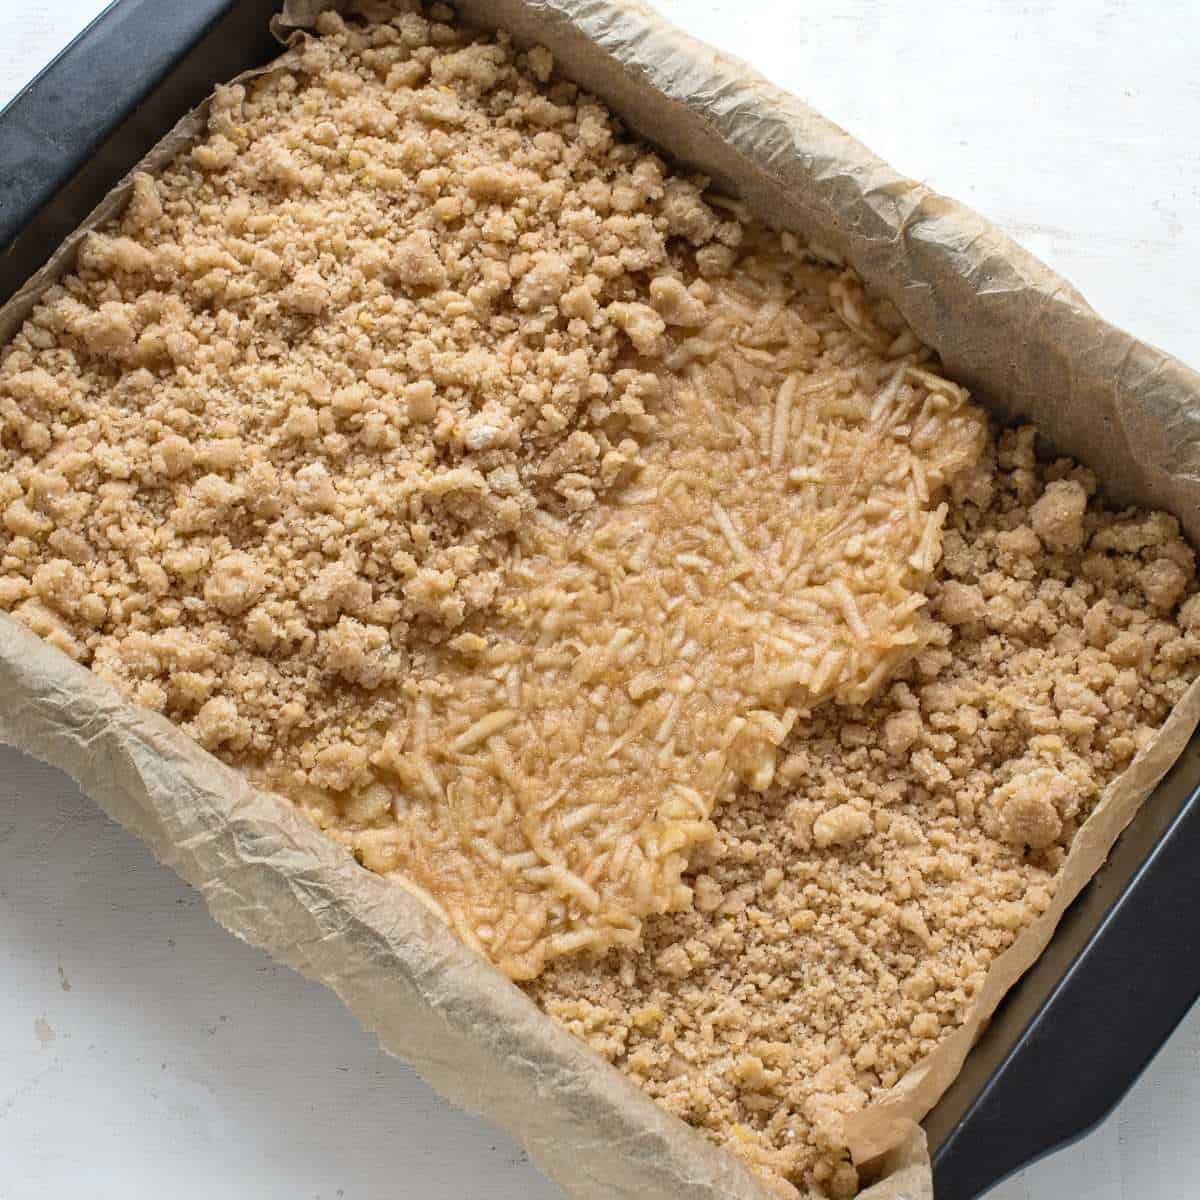 Process photo of making an apple cinnamon crumb cake. There are seen all three layers in the baking pan while completing the cake.